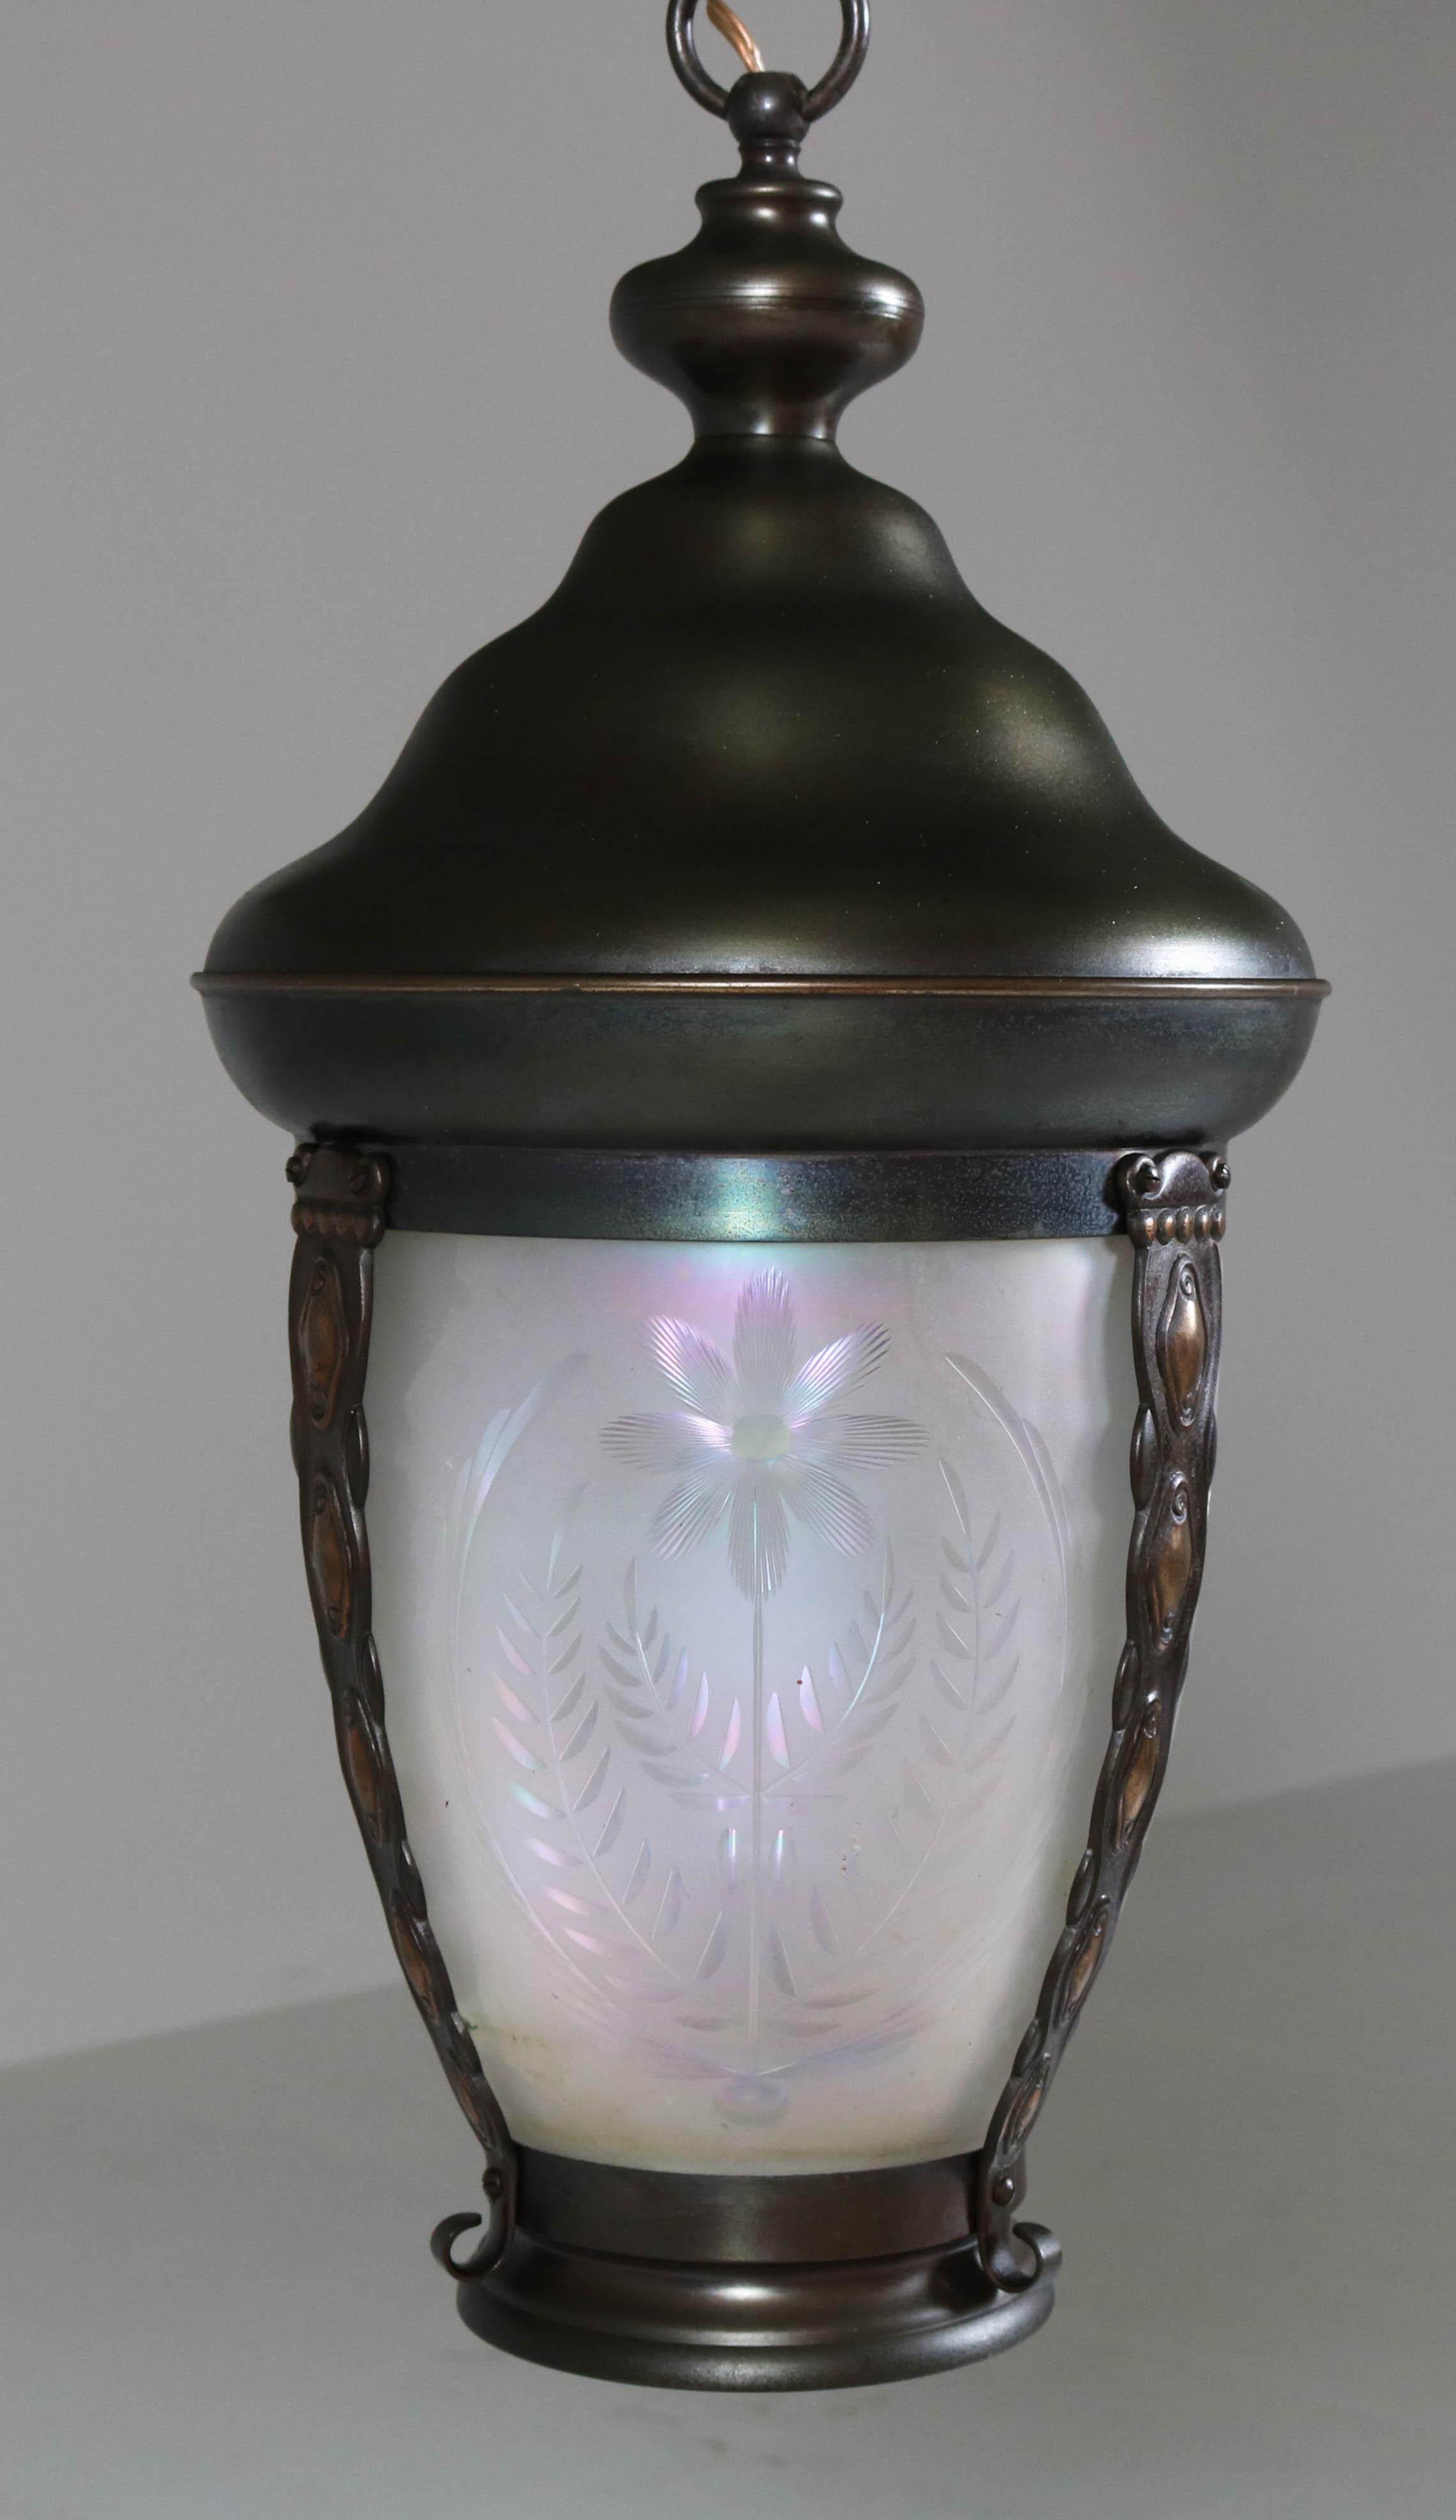 Brass Art Nouveau Lantern or Pendant Lamp with Petrol Glass Shade, 1900s For Sale 1